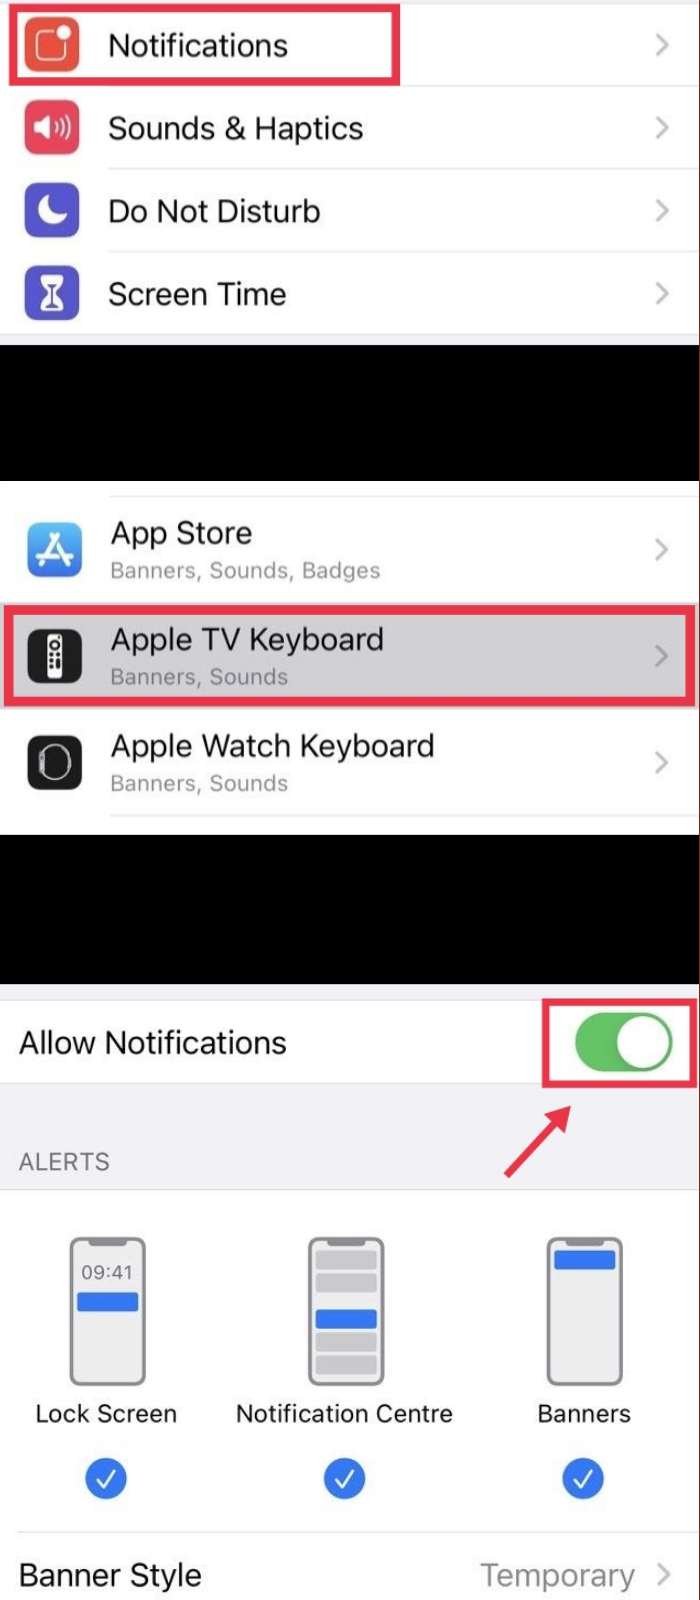 Turn Off the Apple TV Keyboard Notification on iPhone and iPad (step-by-step guide)